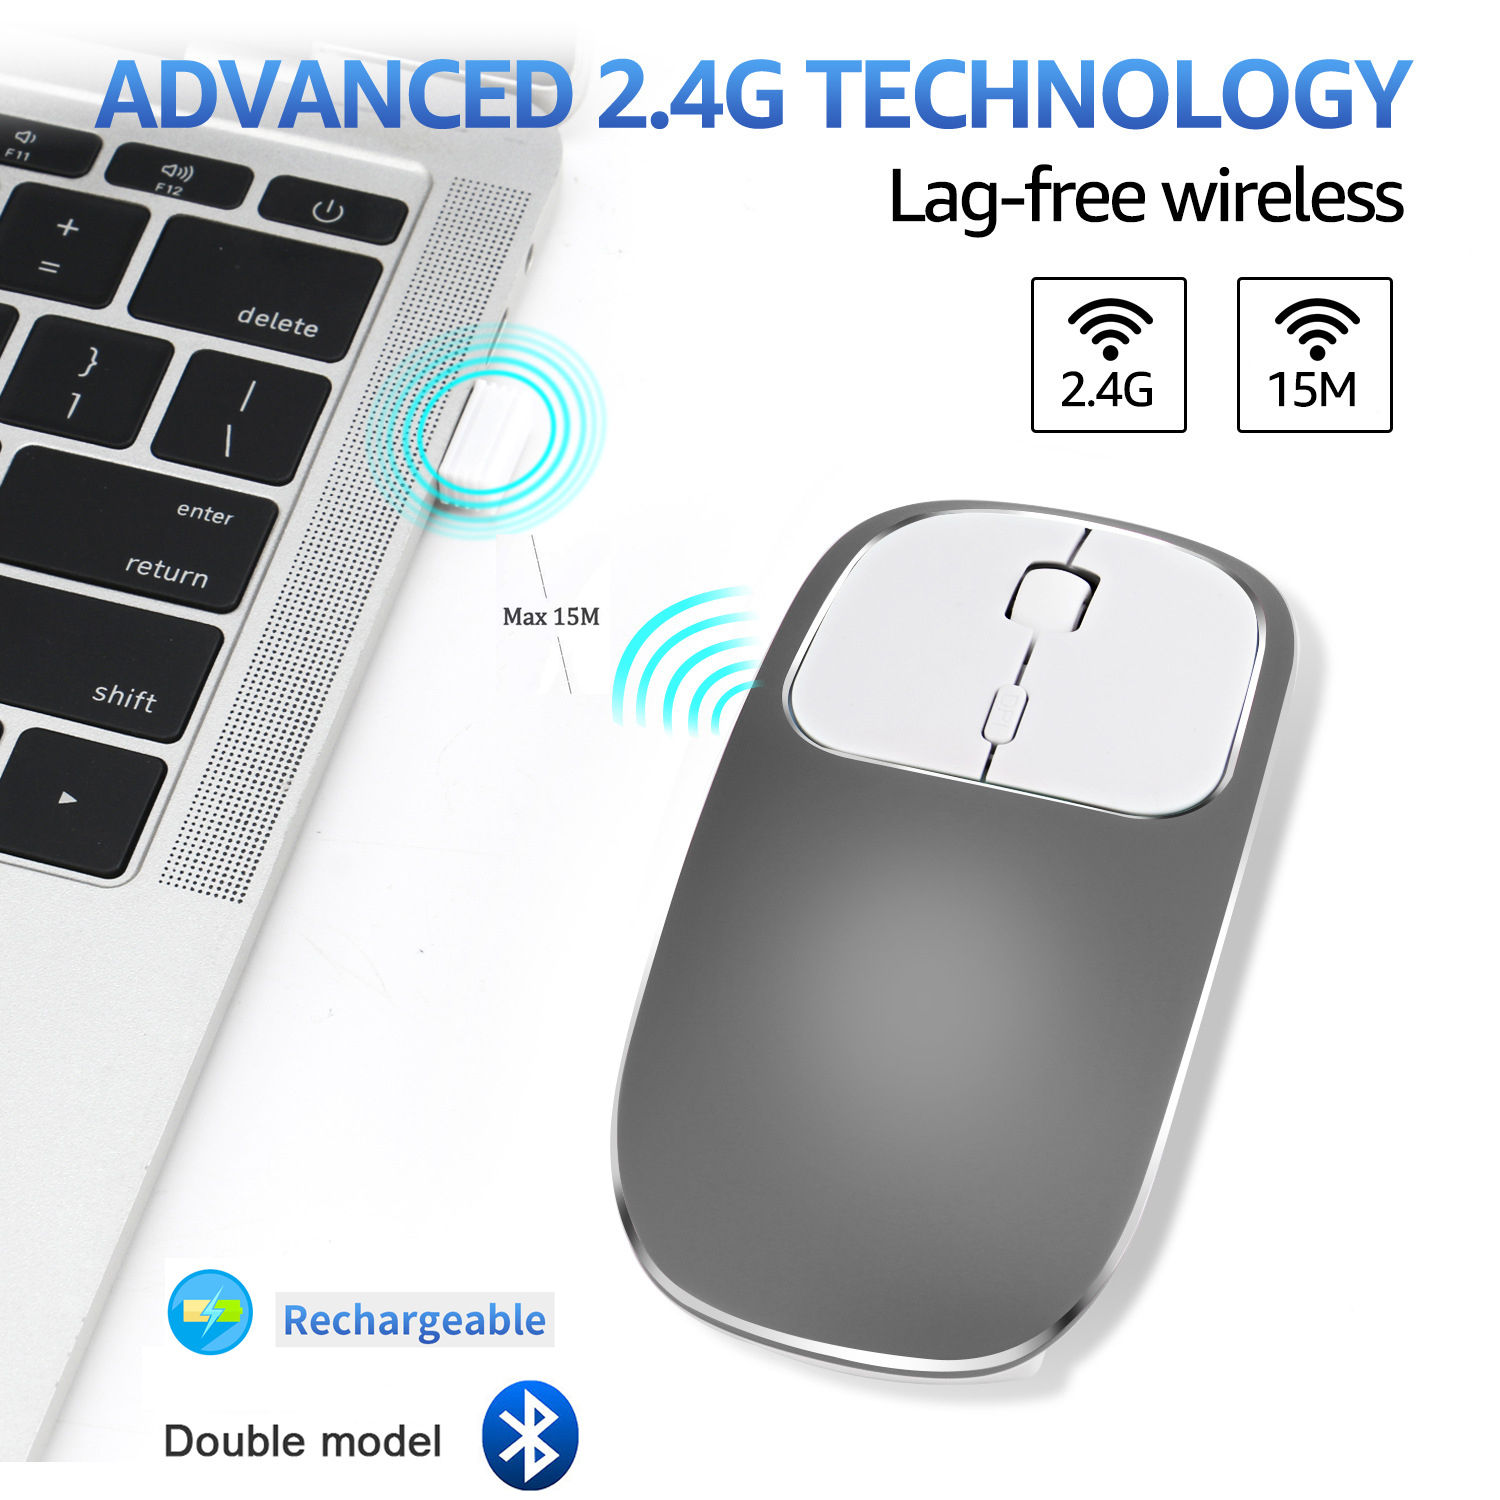 FRUITFUL-Rechargeable-2-4GHz-and-Bluetooth-5-0-Metal-Wireless-Mouse-1600DPI-Silent-Click-dual-mode-Mouses-with-Type-C-Port-for-PC-Tablet-Mac-Desktop-9